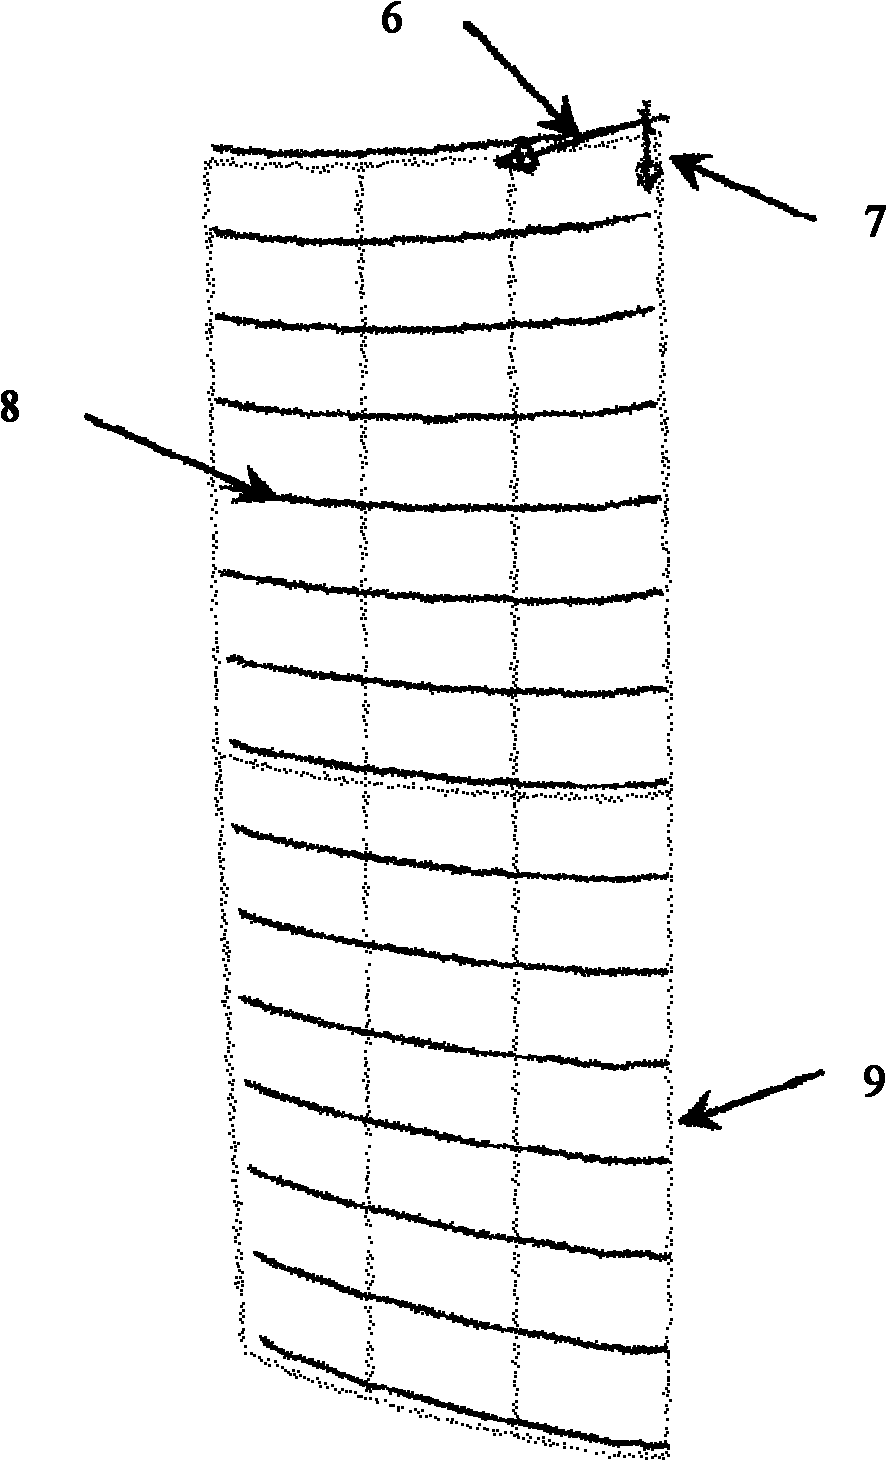 Cutter path generating method for double blade head processing of turbine long blade profile